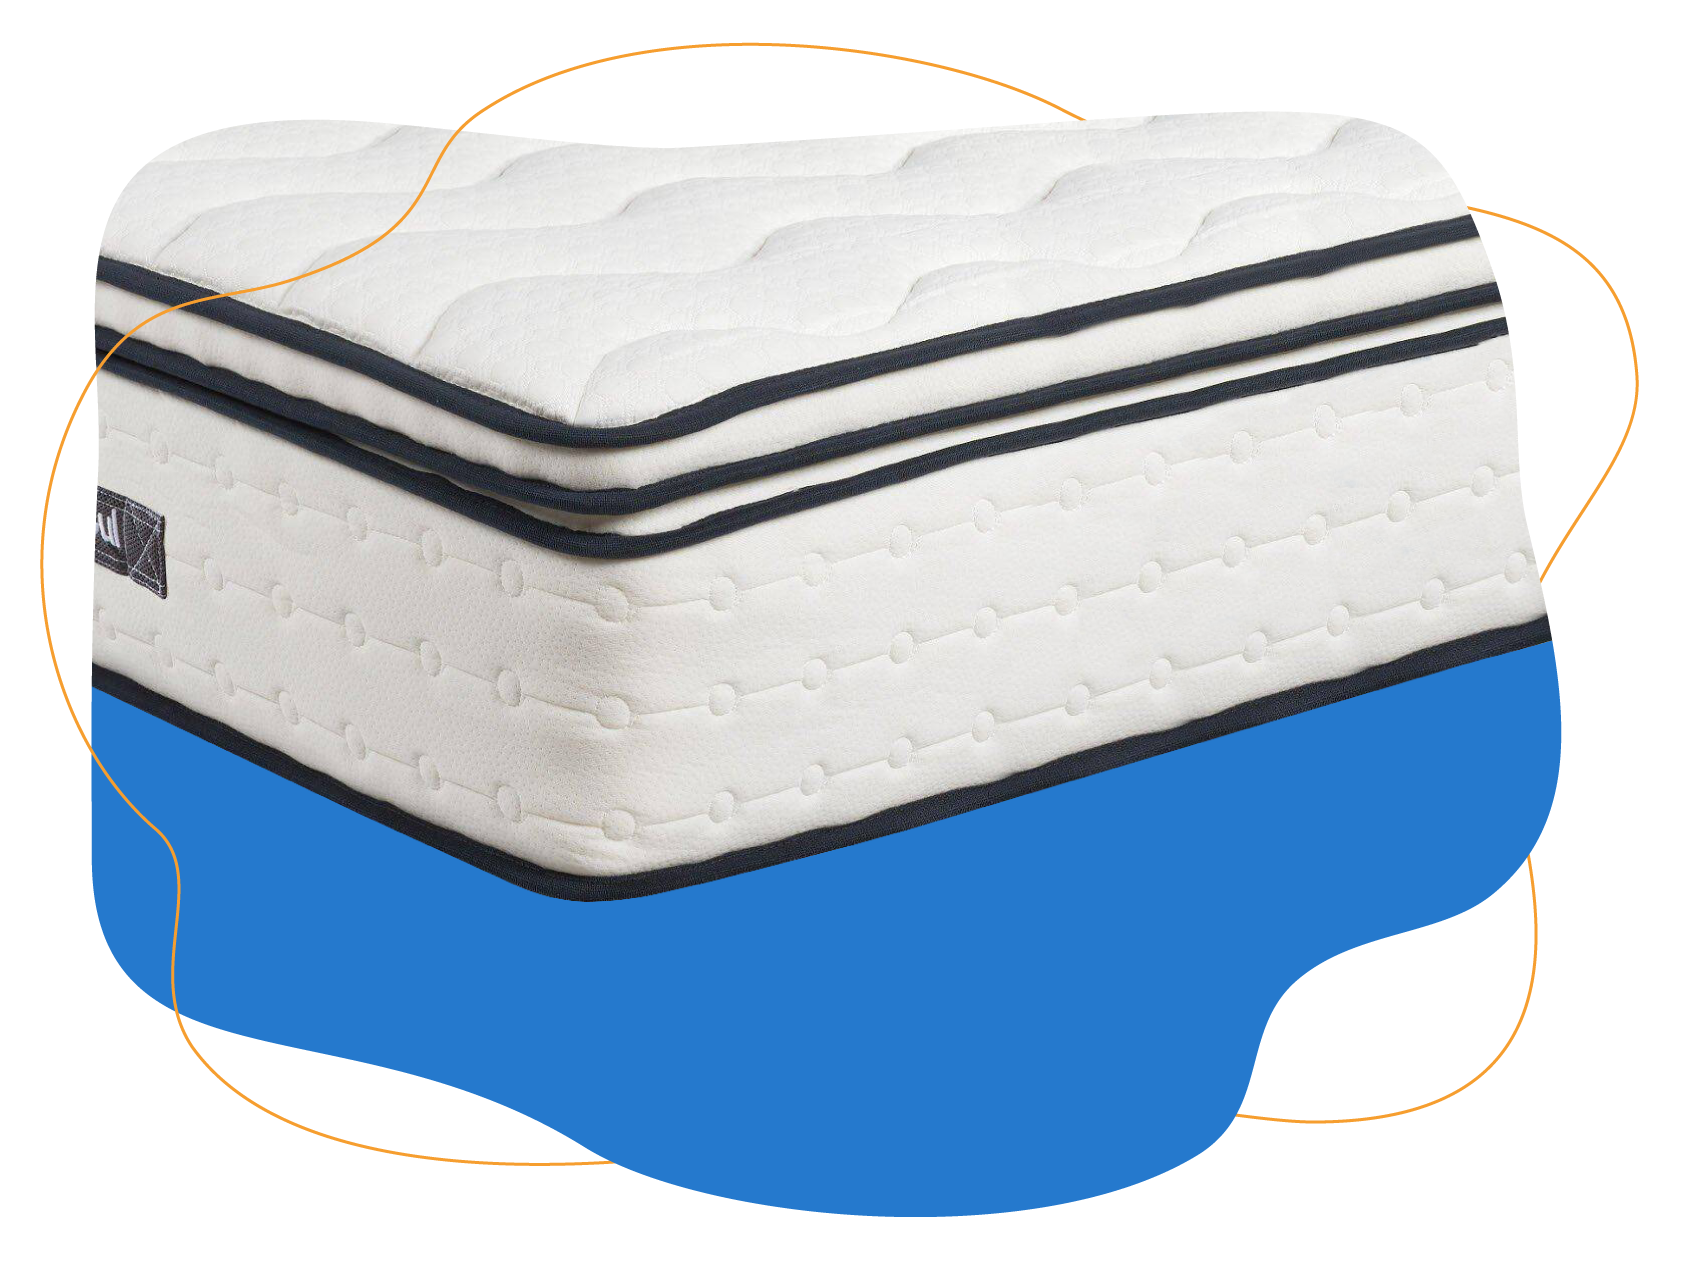 price for kibg beds with mattress